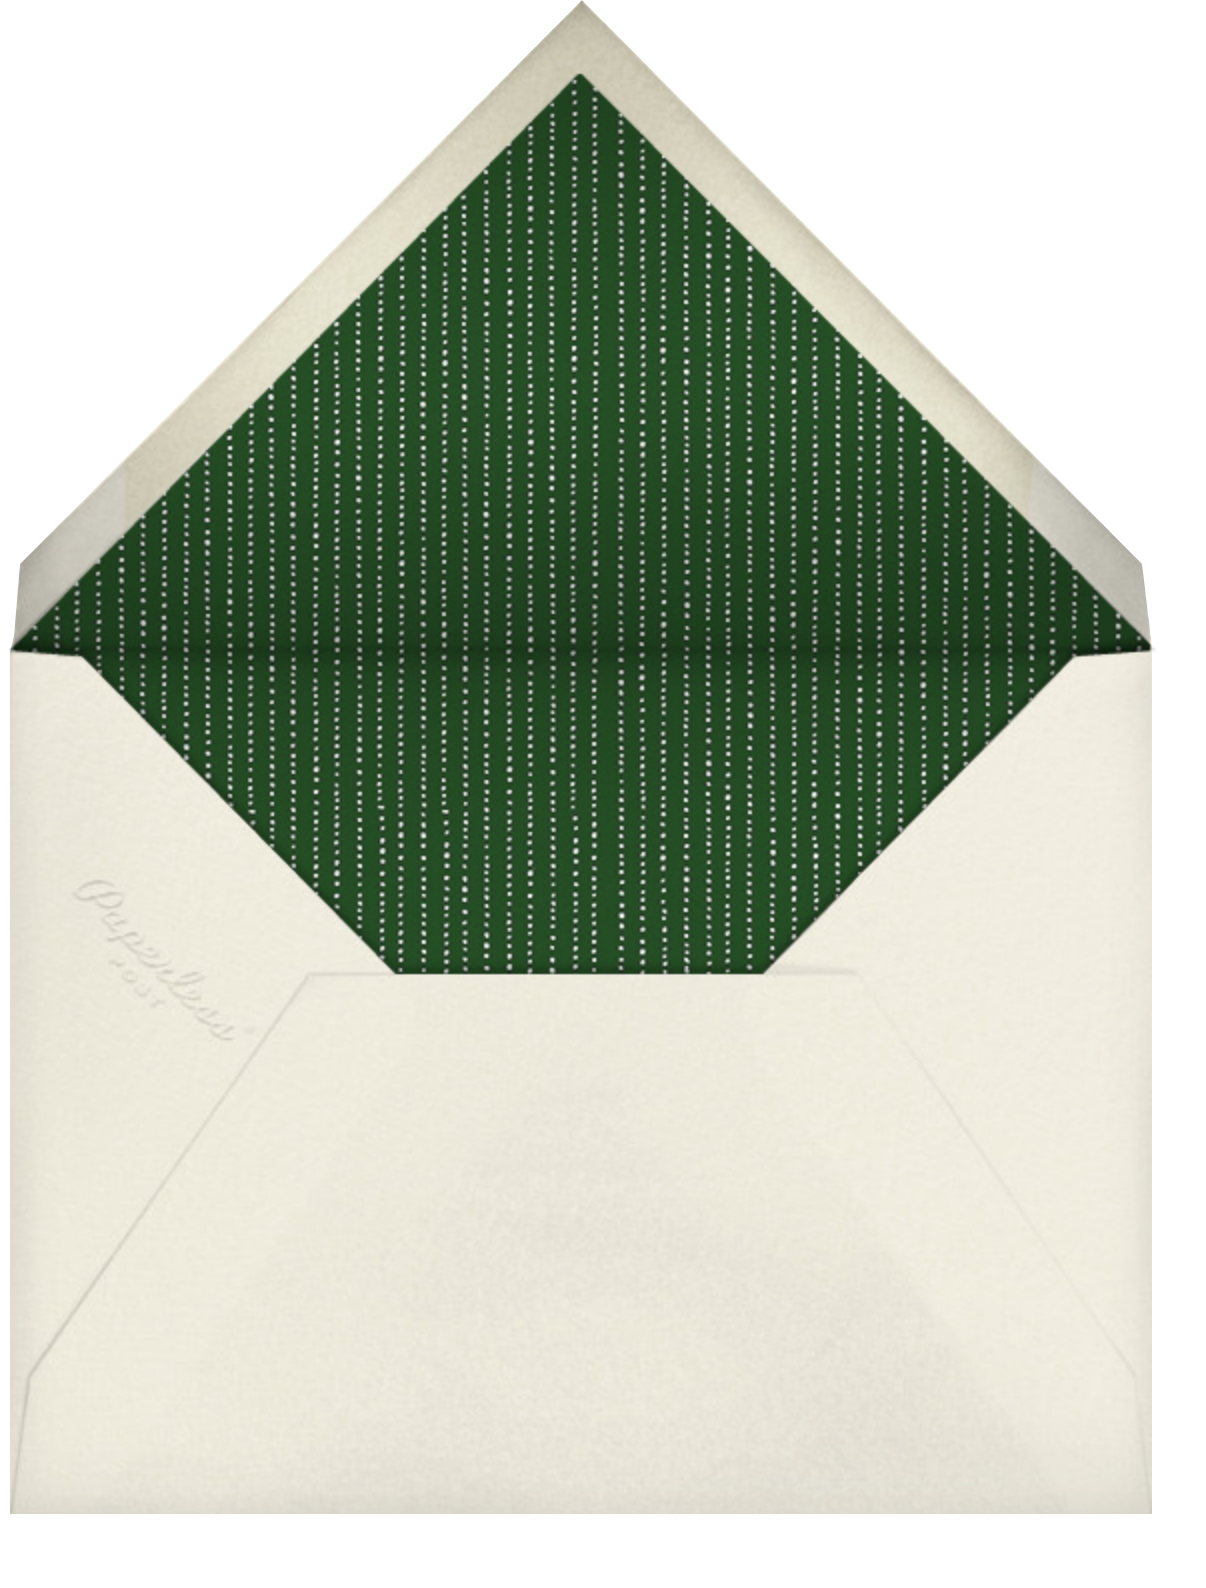 Aspen Leaves - Cream with Green/Gold (Tall Primary) - Paperless Post - Envelope